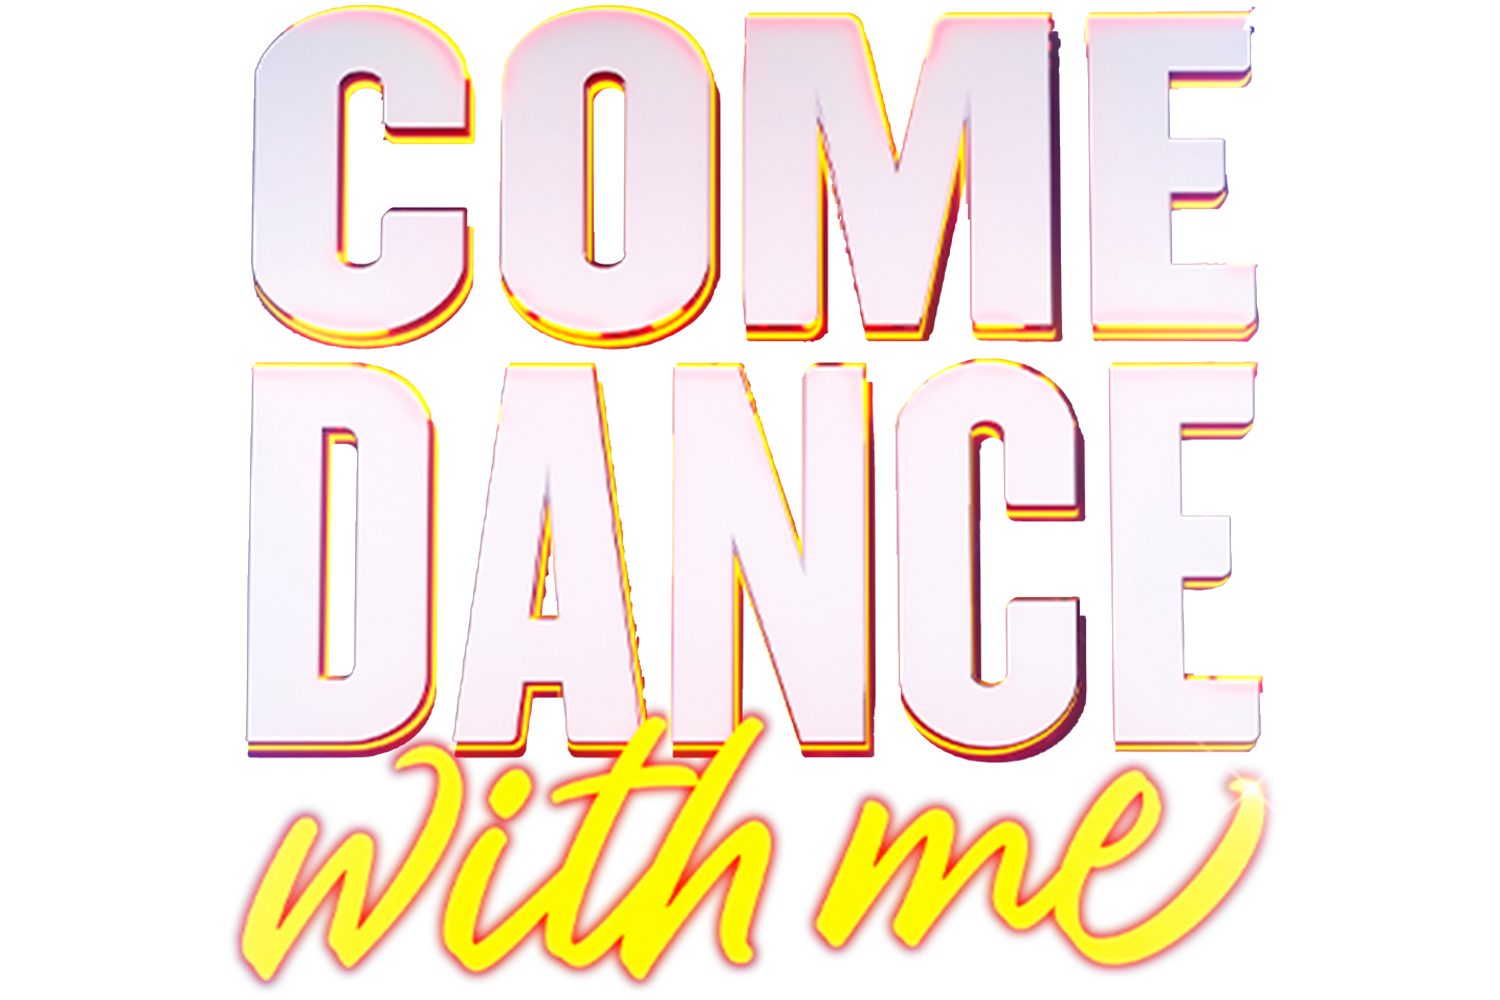 Come Dance With Me